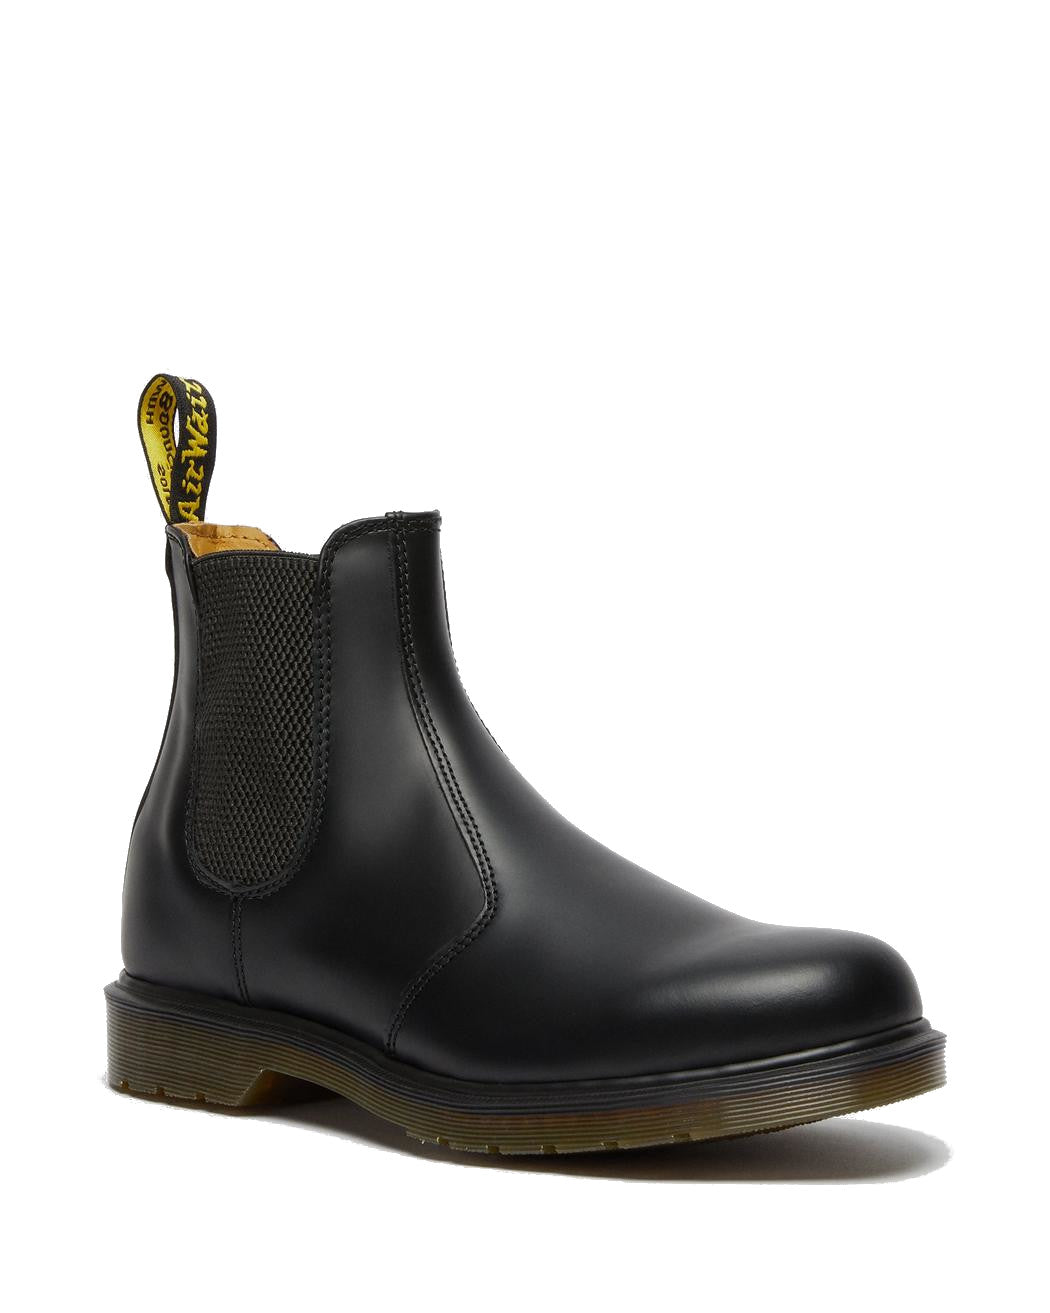 Dr. Martens Women's 2976 Smooth Leather Chelsea Boot - Black